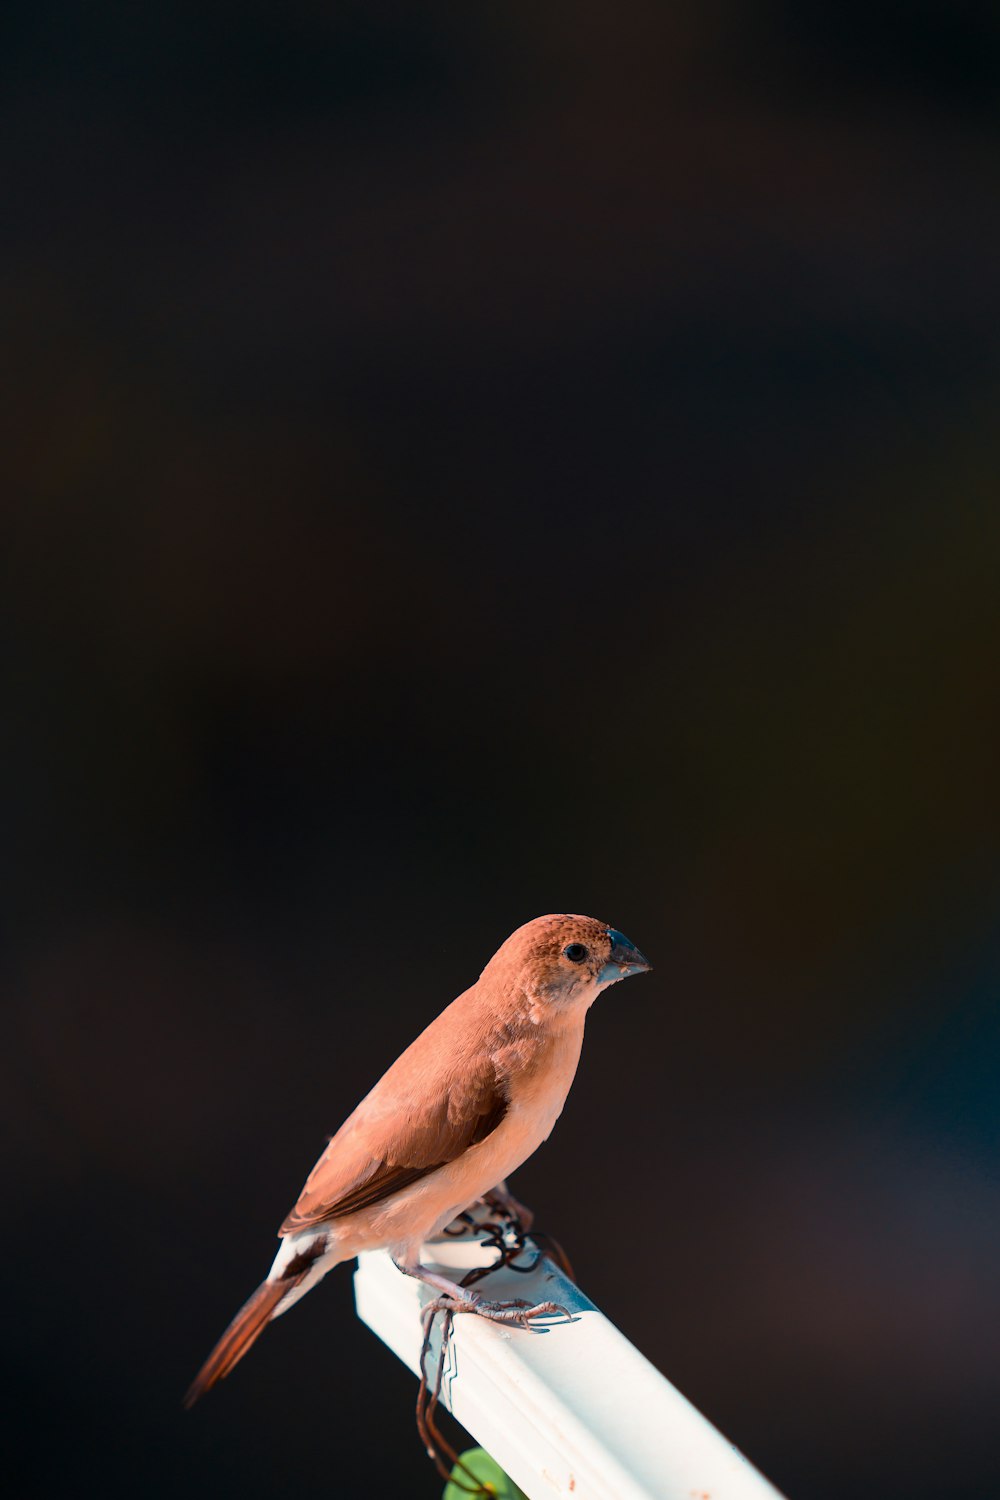 a small brown bird perched on top of a white pole